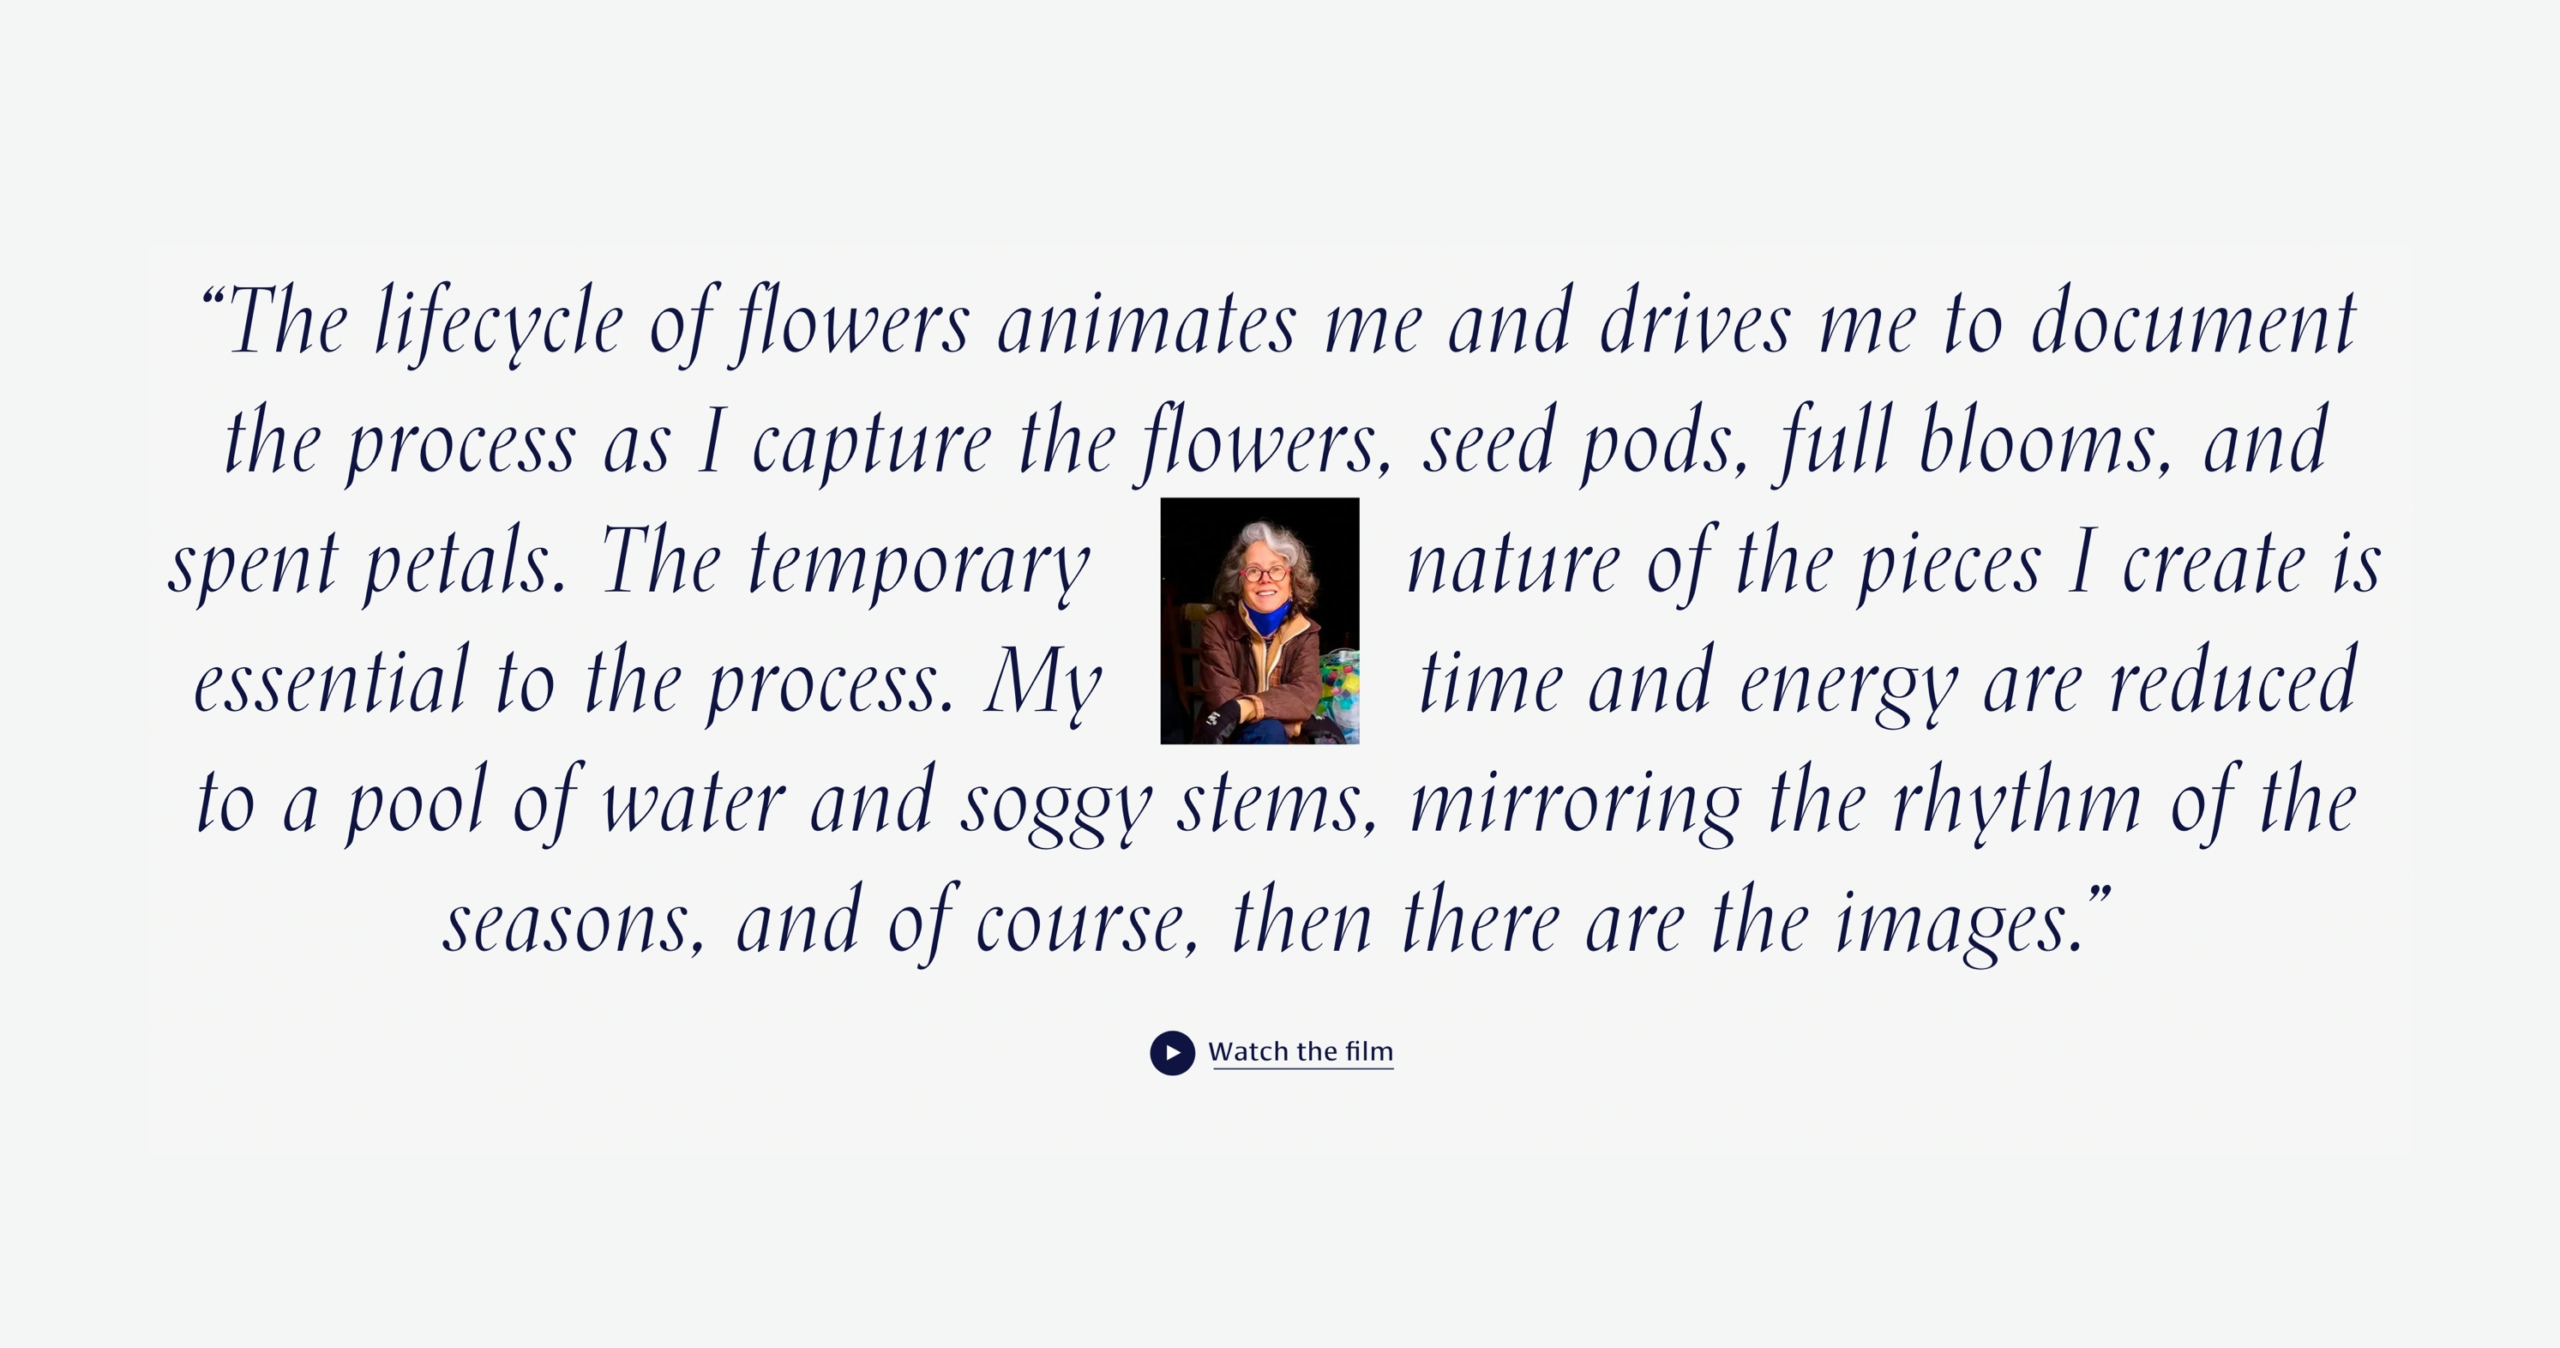 A quote from Anna “The lifecycle of flowers animates me and drives me to document the process as I capture the flowers, seed pods, full blooms, and spent petals. The temporary nature of the pieces I create is essential to the process. My time and energy are reduced to a pool of water and soggy stems, mirroring the rhythm of the seasons, and of course, then there are the images.” A picture of Anna is ​​in the centre and users are invited to “Watch the film” with an accompanying icon.